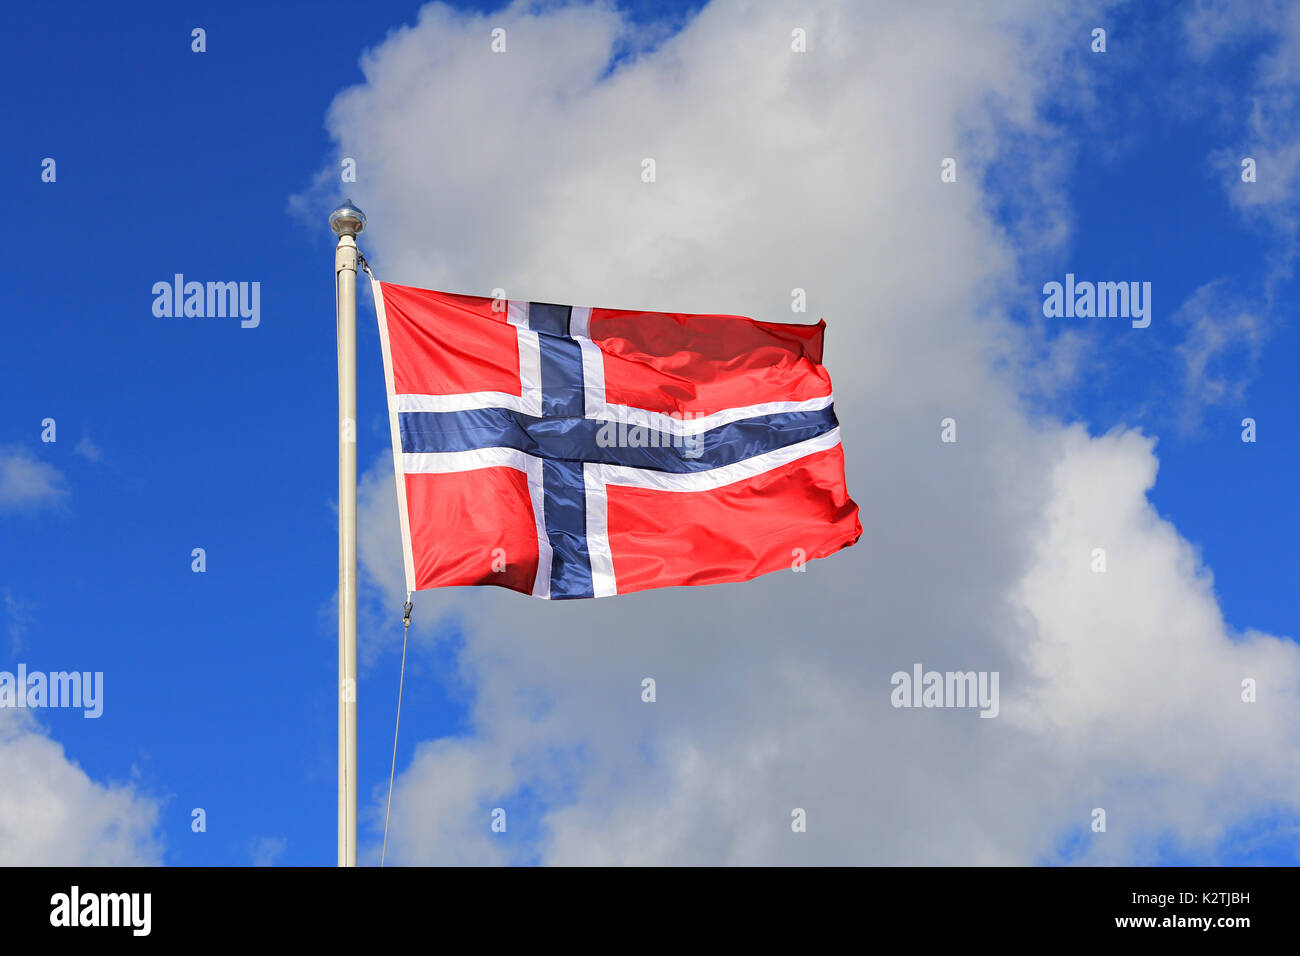 Flag of Norway against blue sky and white clouds. The flag of Norway is red with an indigo blue Scandinavian cross fimbriated in white. Stock Photo